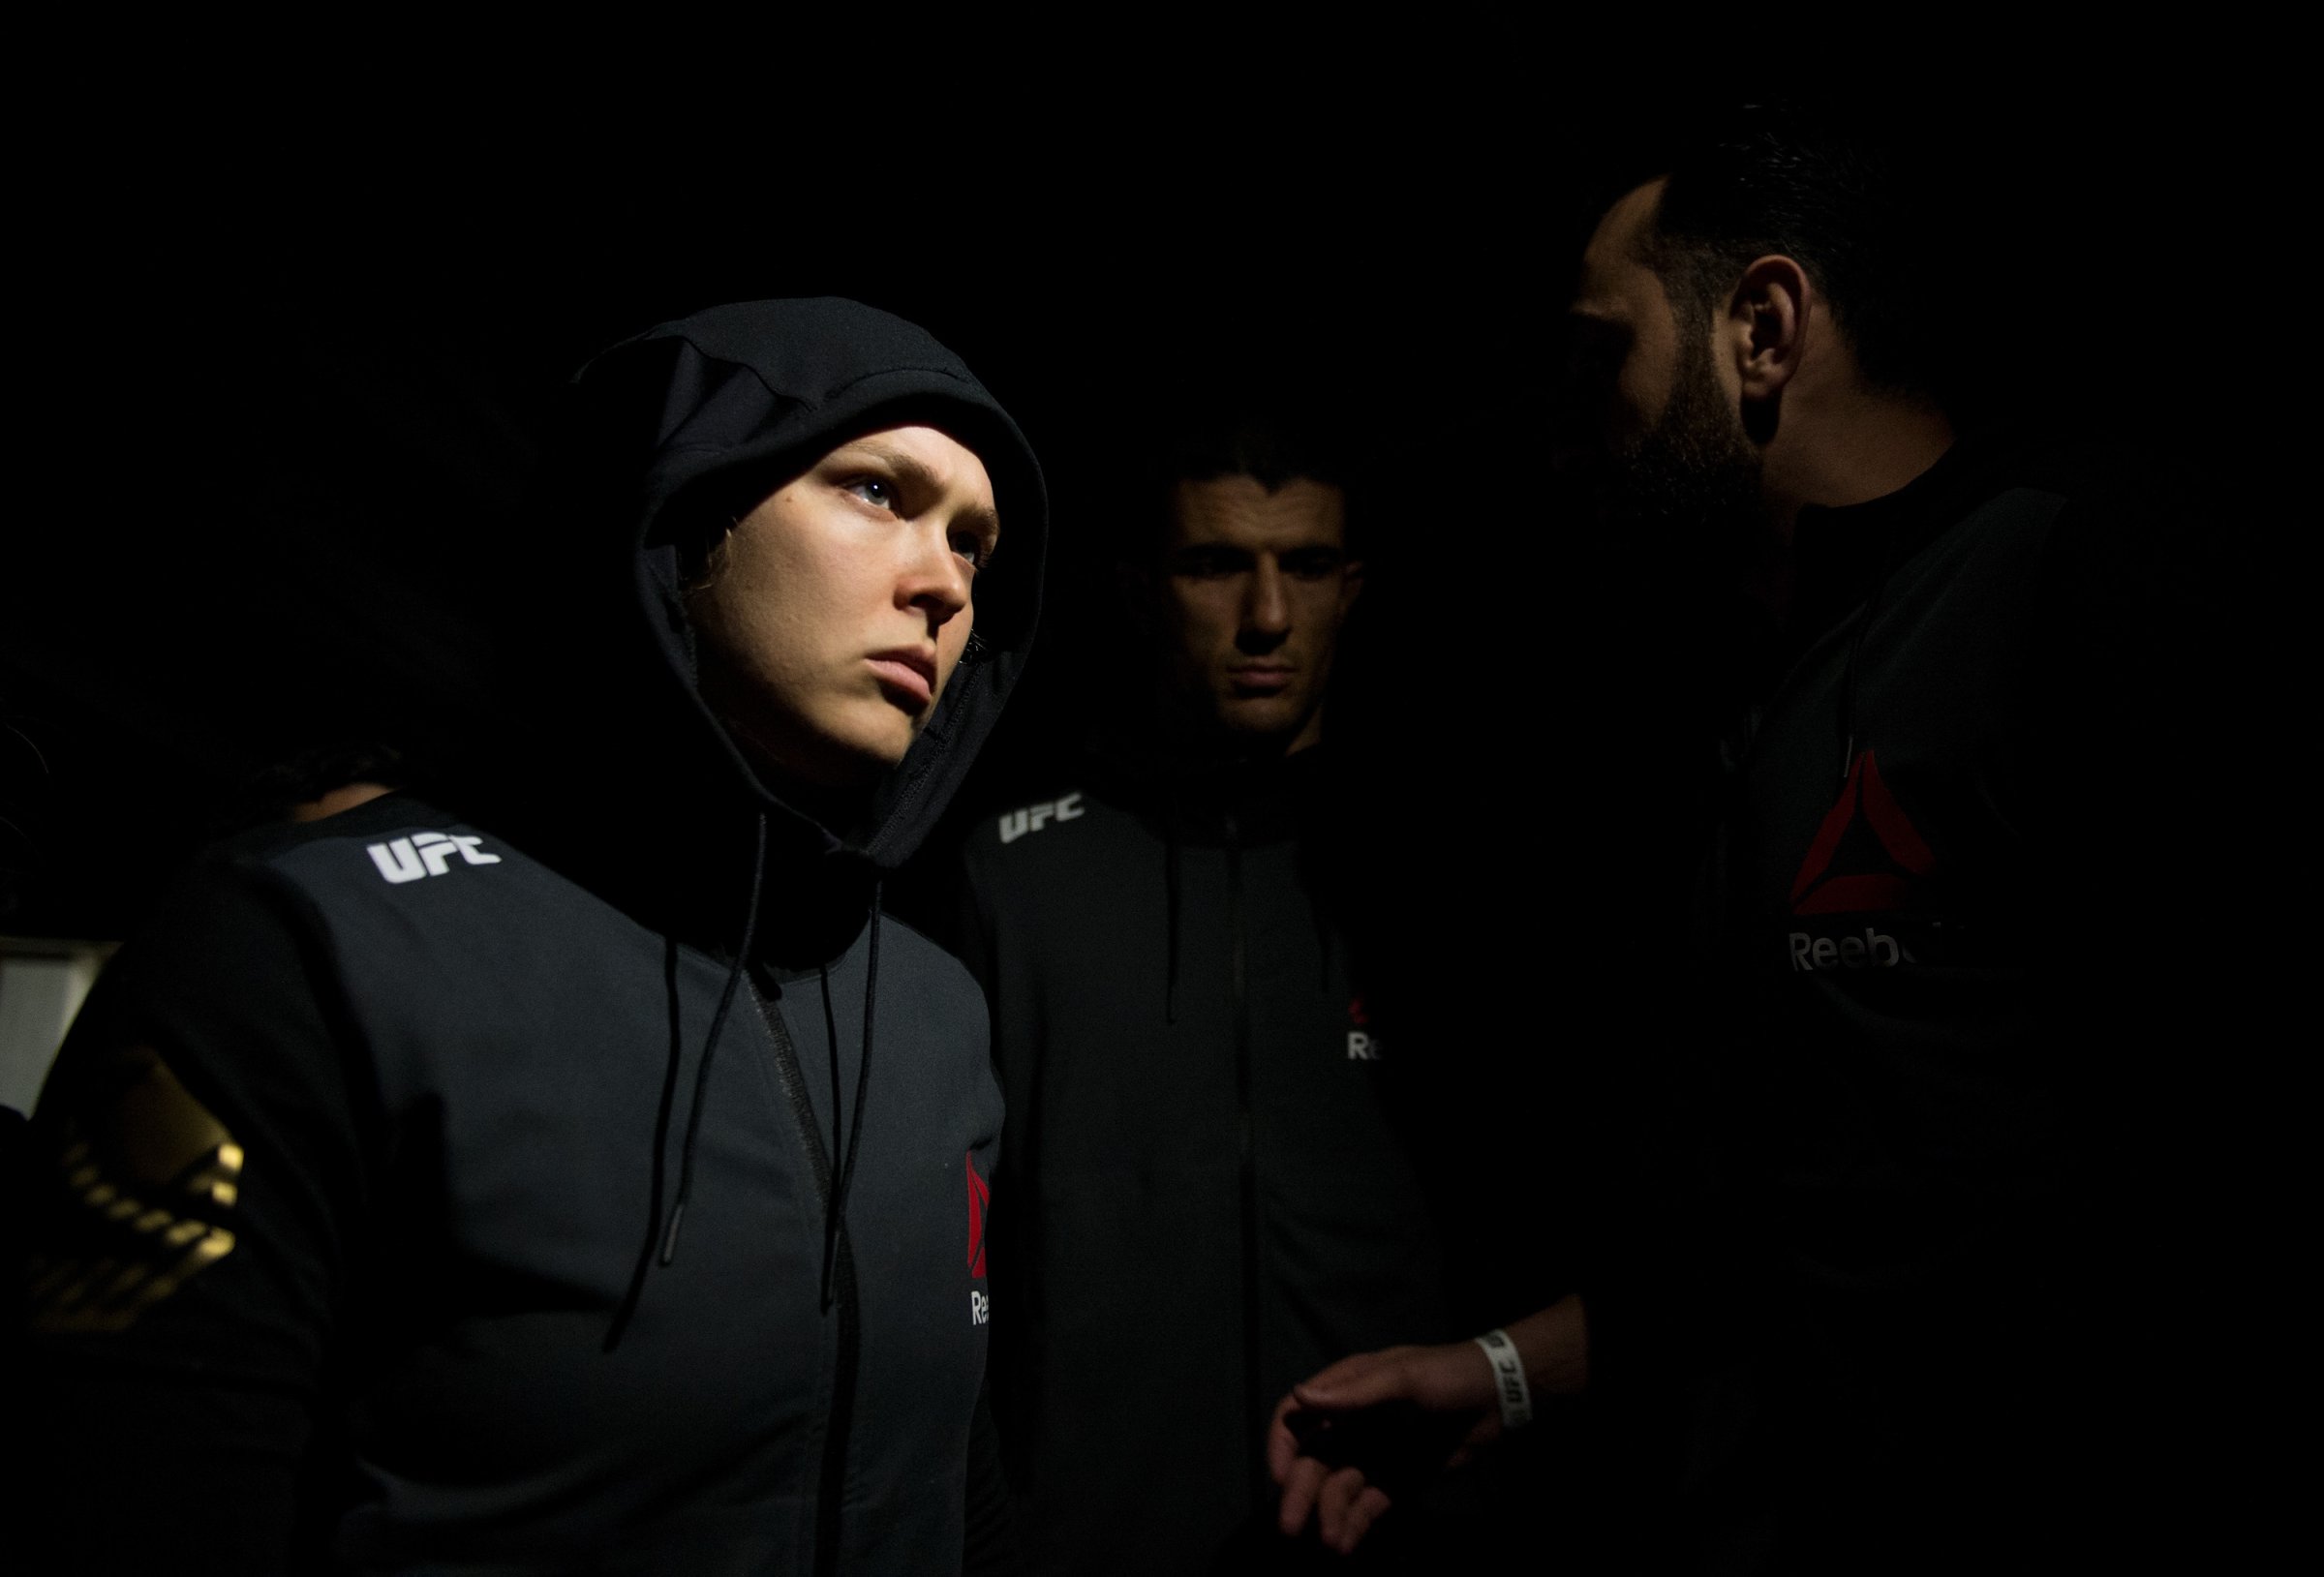 Ronda Rousey prepares to enter the Octagon before facing Holly Holm in their UFC women's bantamweight championship bout during the UFC 193 event at Etihad Stadium in Melbourne, Australia, on Nov. 15, 2015